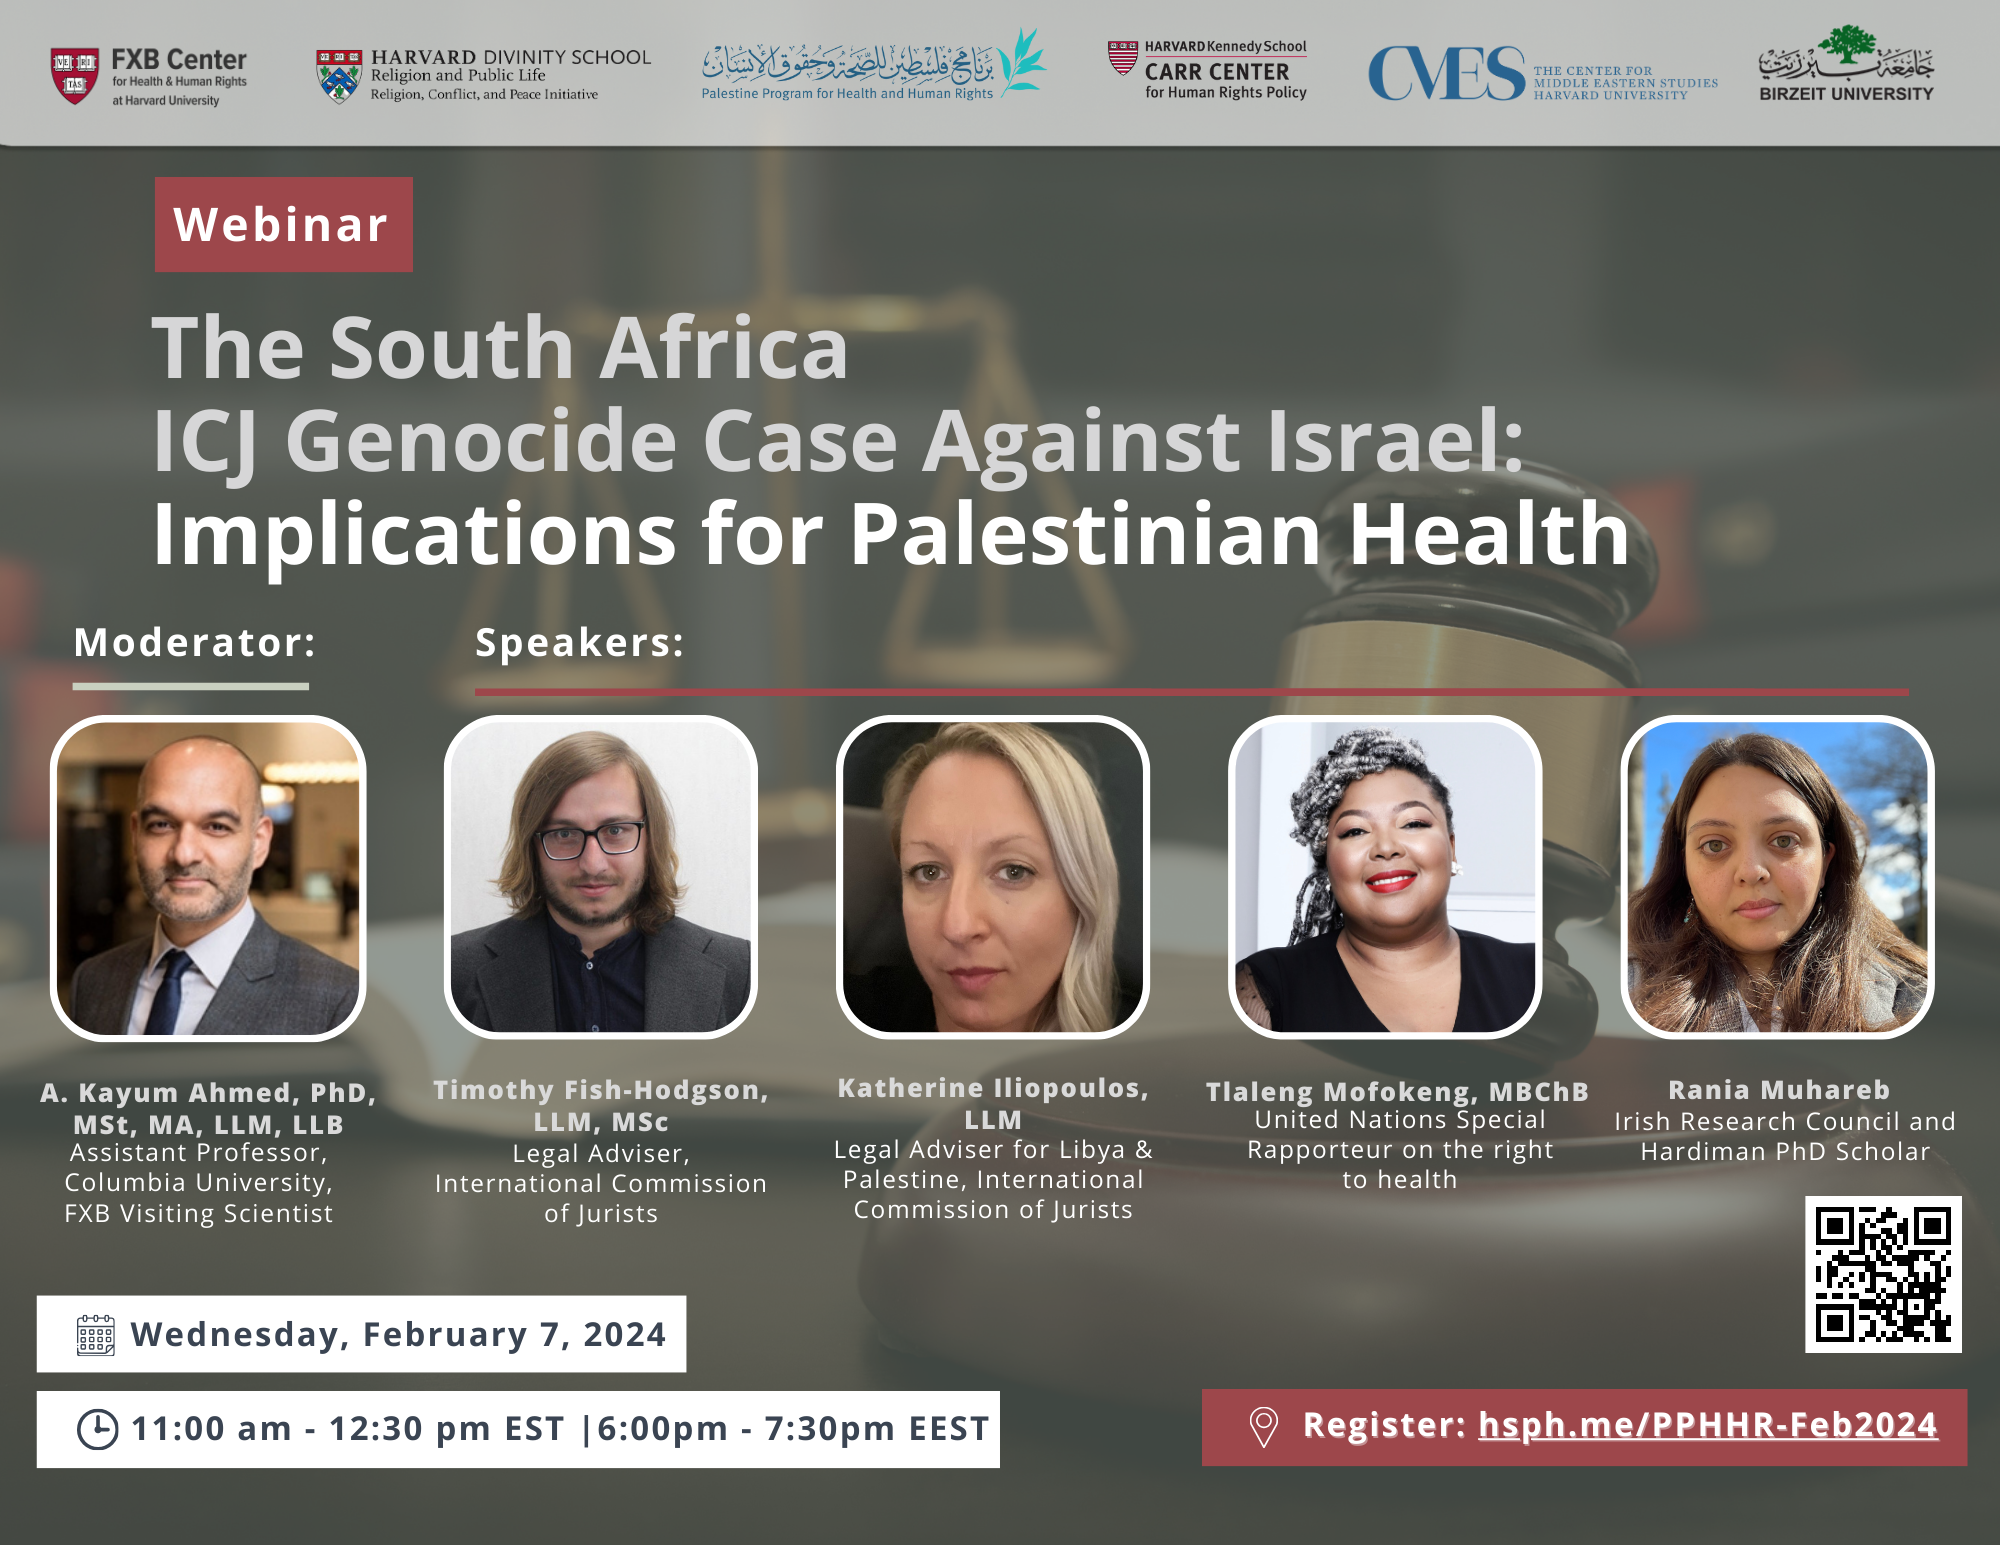 Webinar: The South Africa ICJ Genocide Case Against Israel: Implications for Palestinian Health